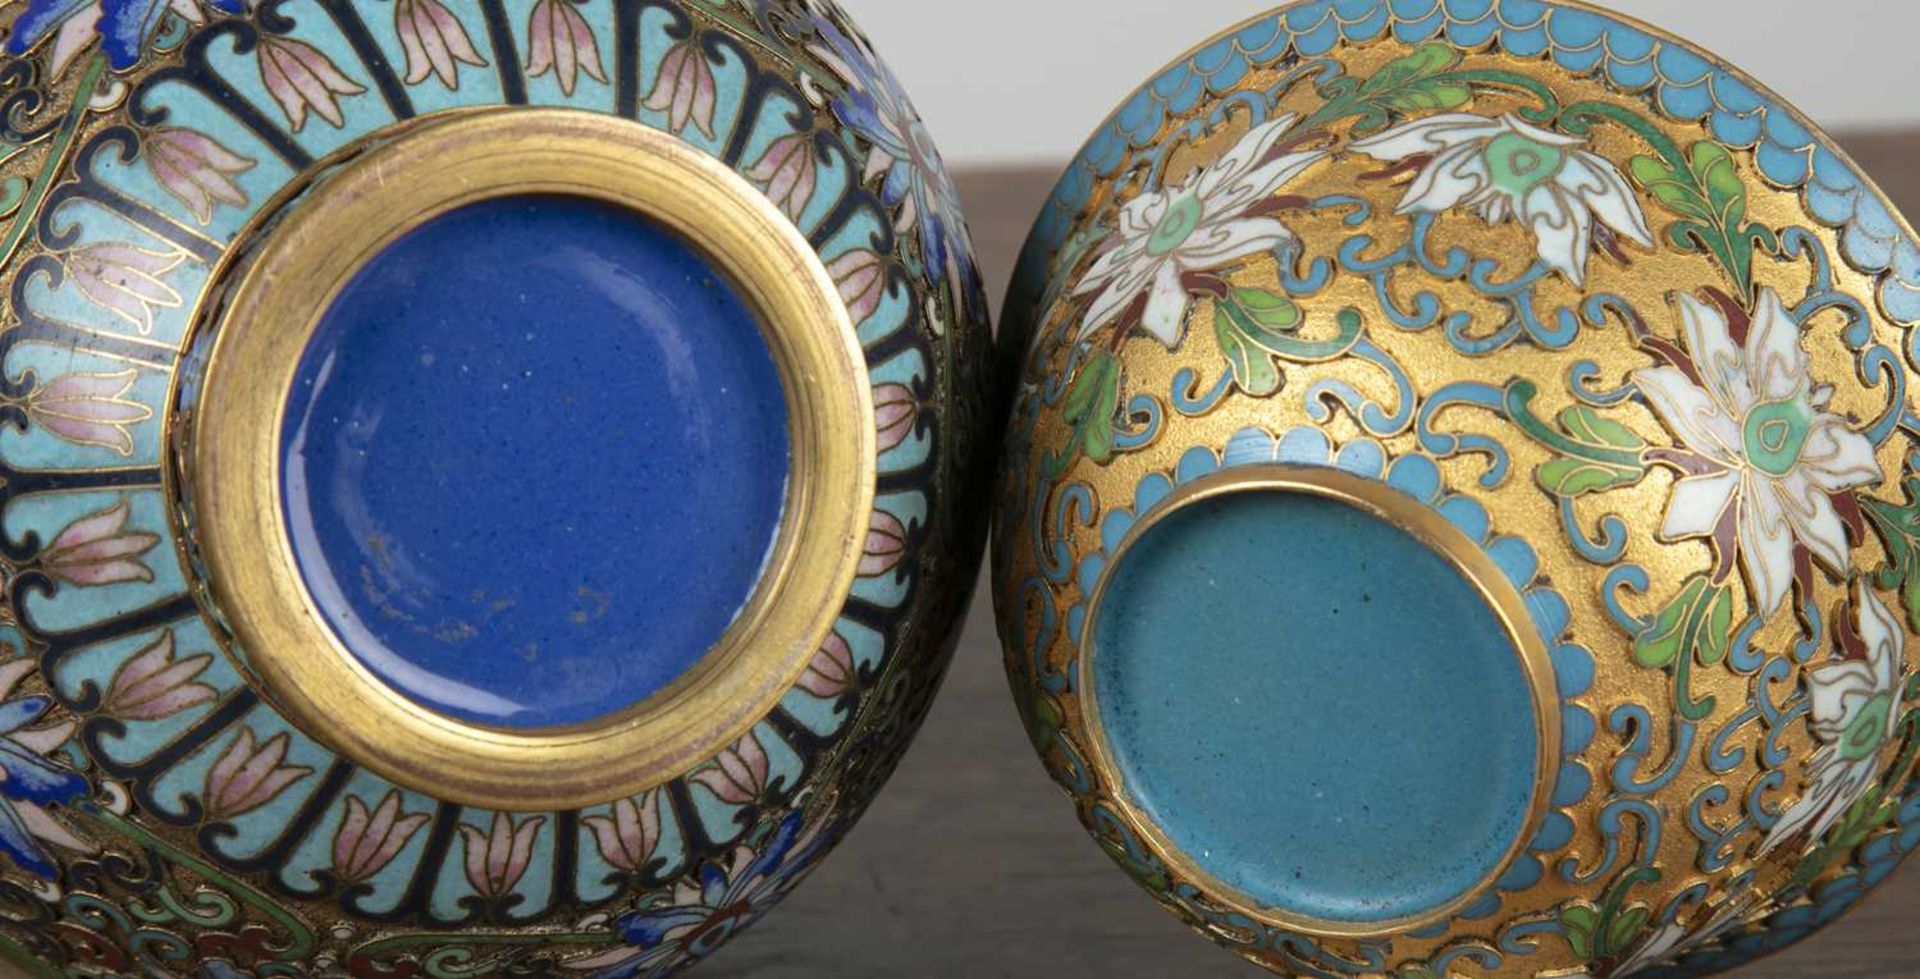 Cloisonne garlic neck vase Chinese, 19th/early 20th Century 21cm high and a cloisonne bowl and cover - Image 4 of 4